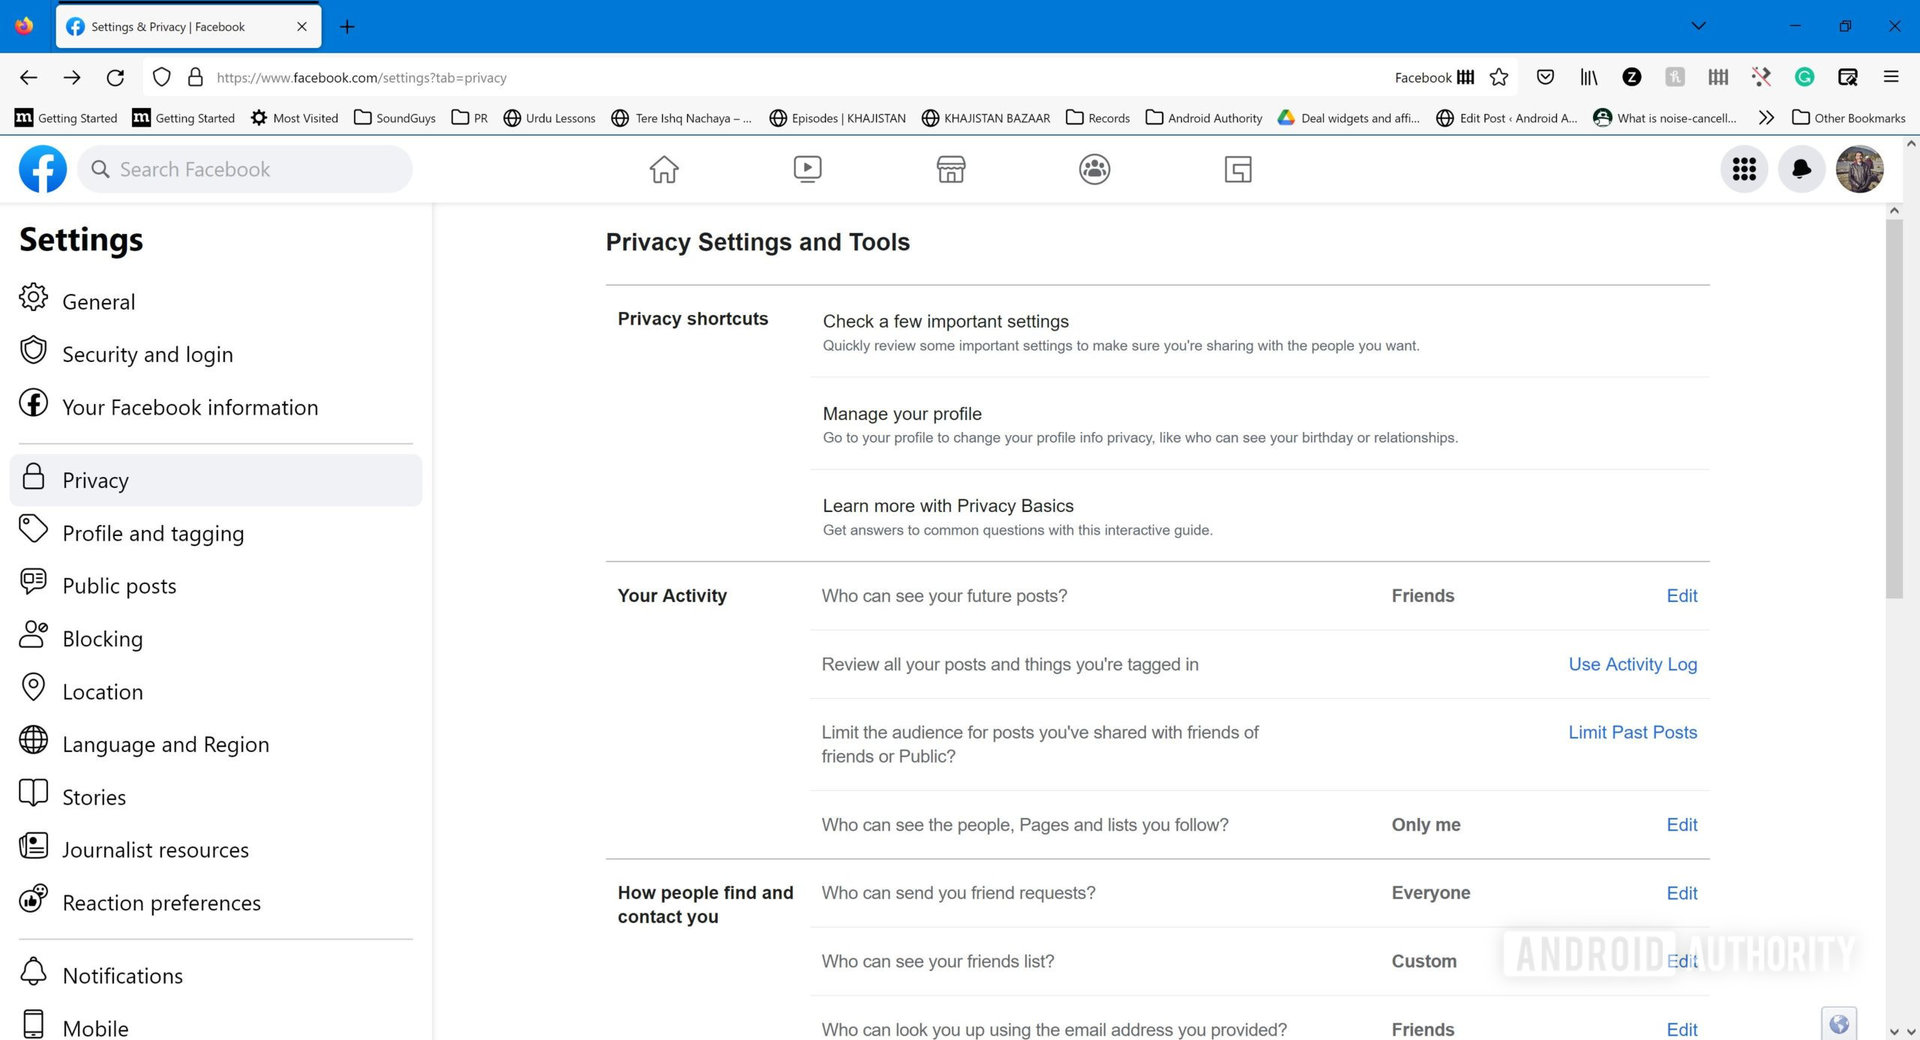 A screenshot of the Facebook Settings menu on desktop in a web browser showing the Privacy options.